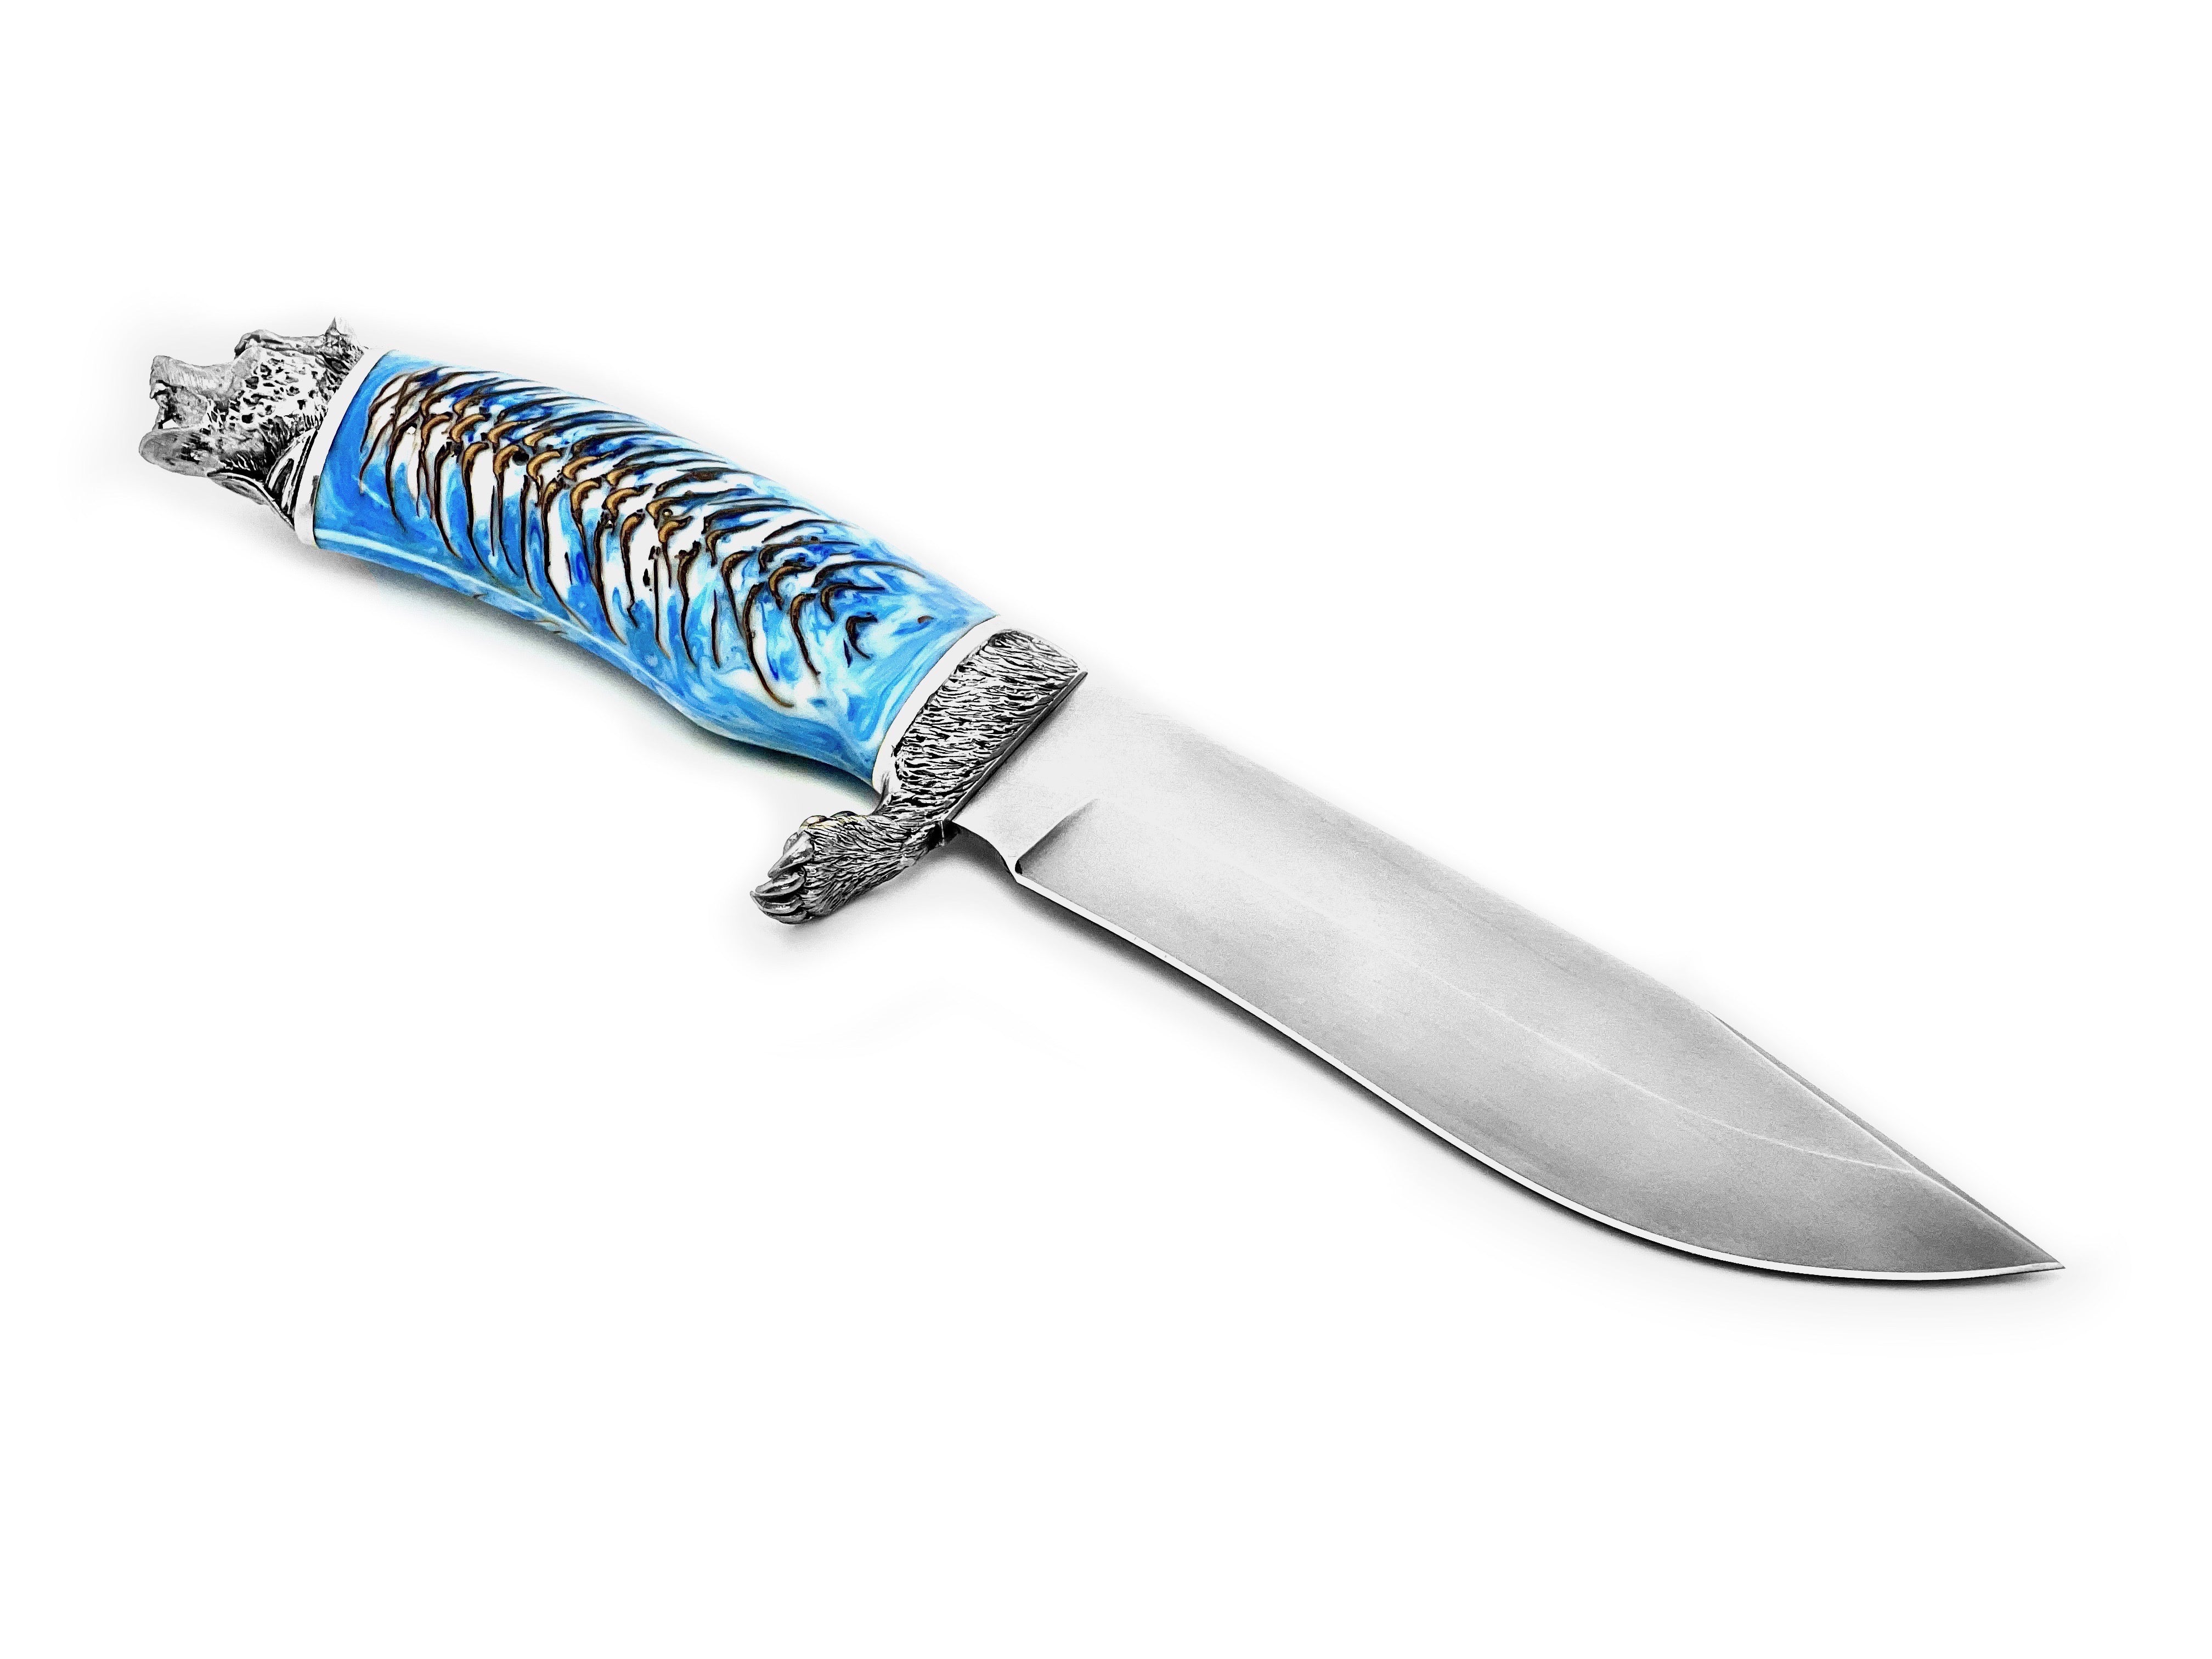 M390 Steel Hunting Knife with Acrylic Pineapple